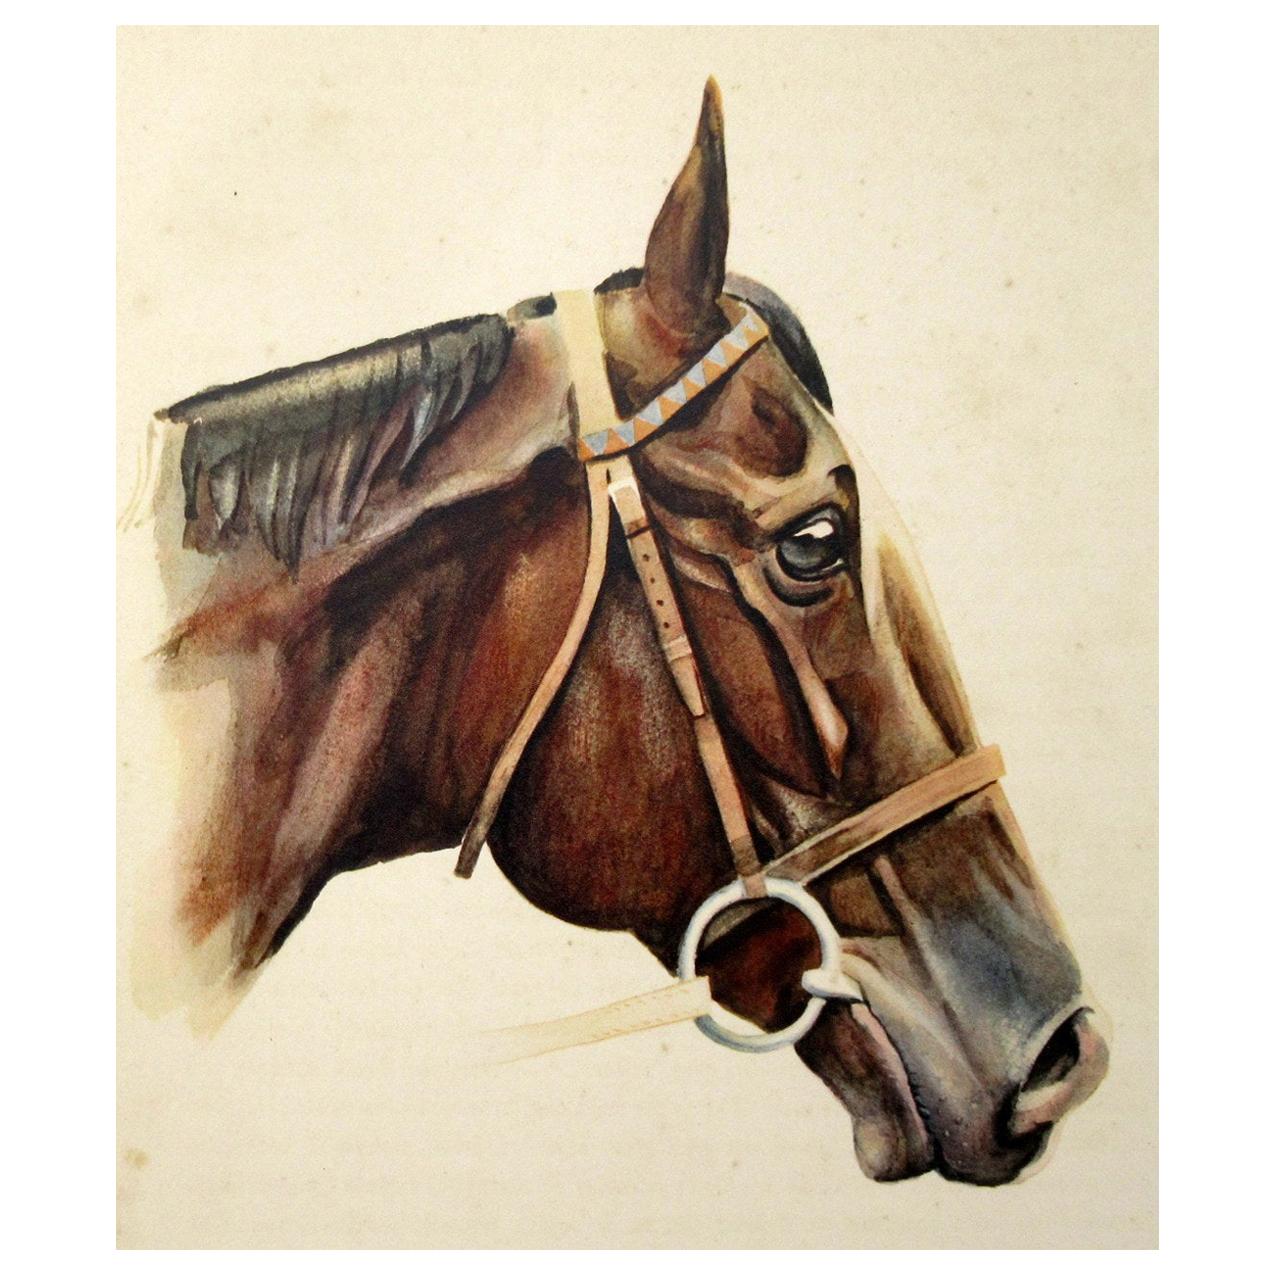 Antique Equine Racehorse Painting Tourbillon French Thoroughbred Horse Racing 